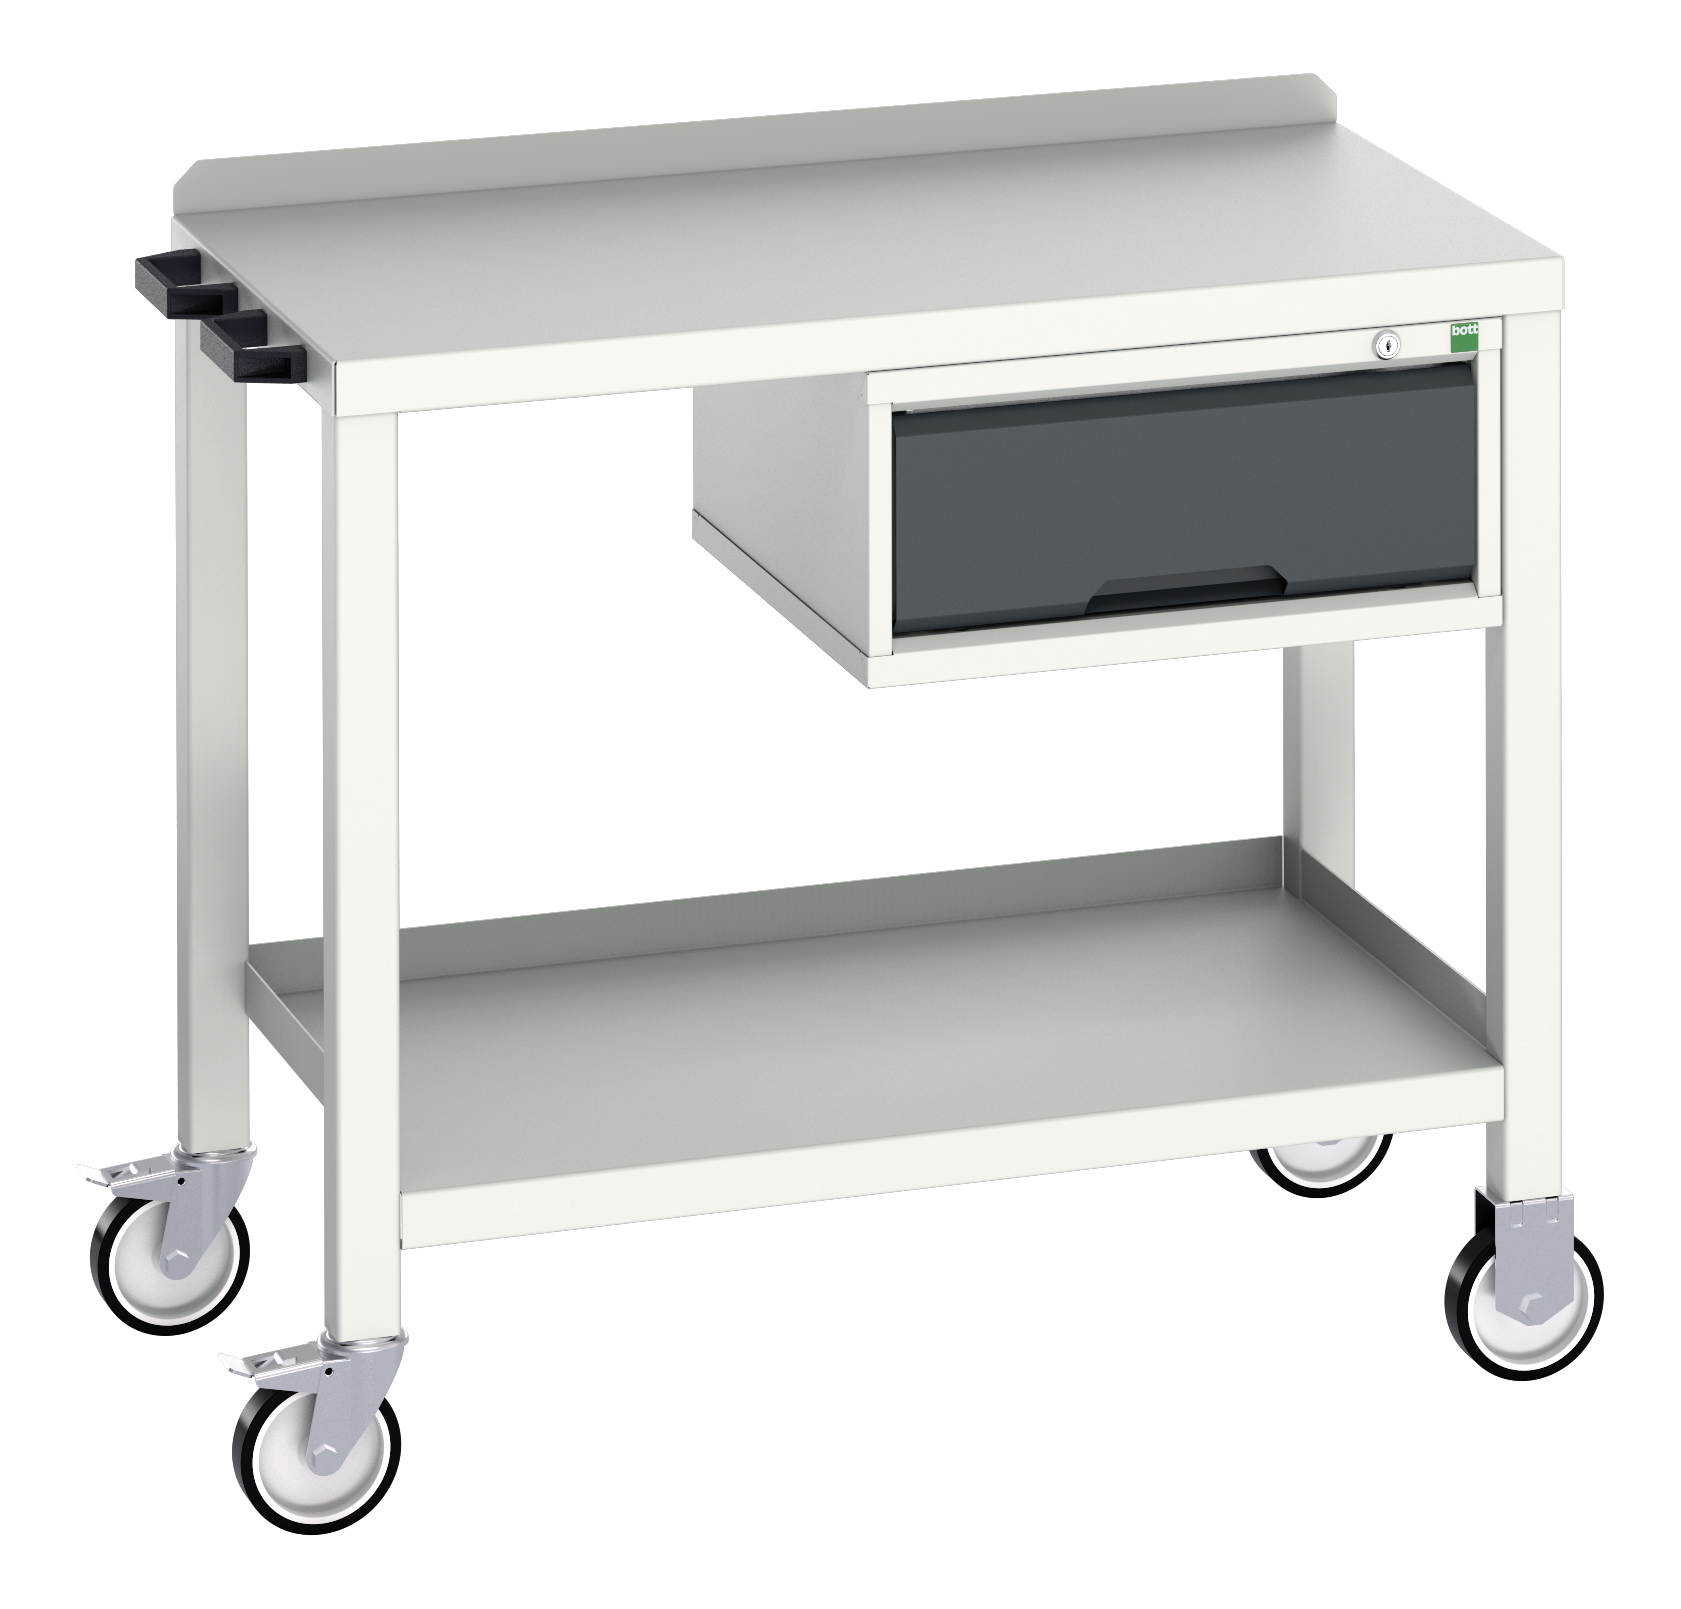 Bott Verso Mobile Welded Bench With 1 Drawer Cabinet - 16922800.19